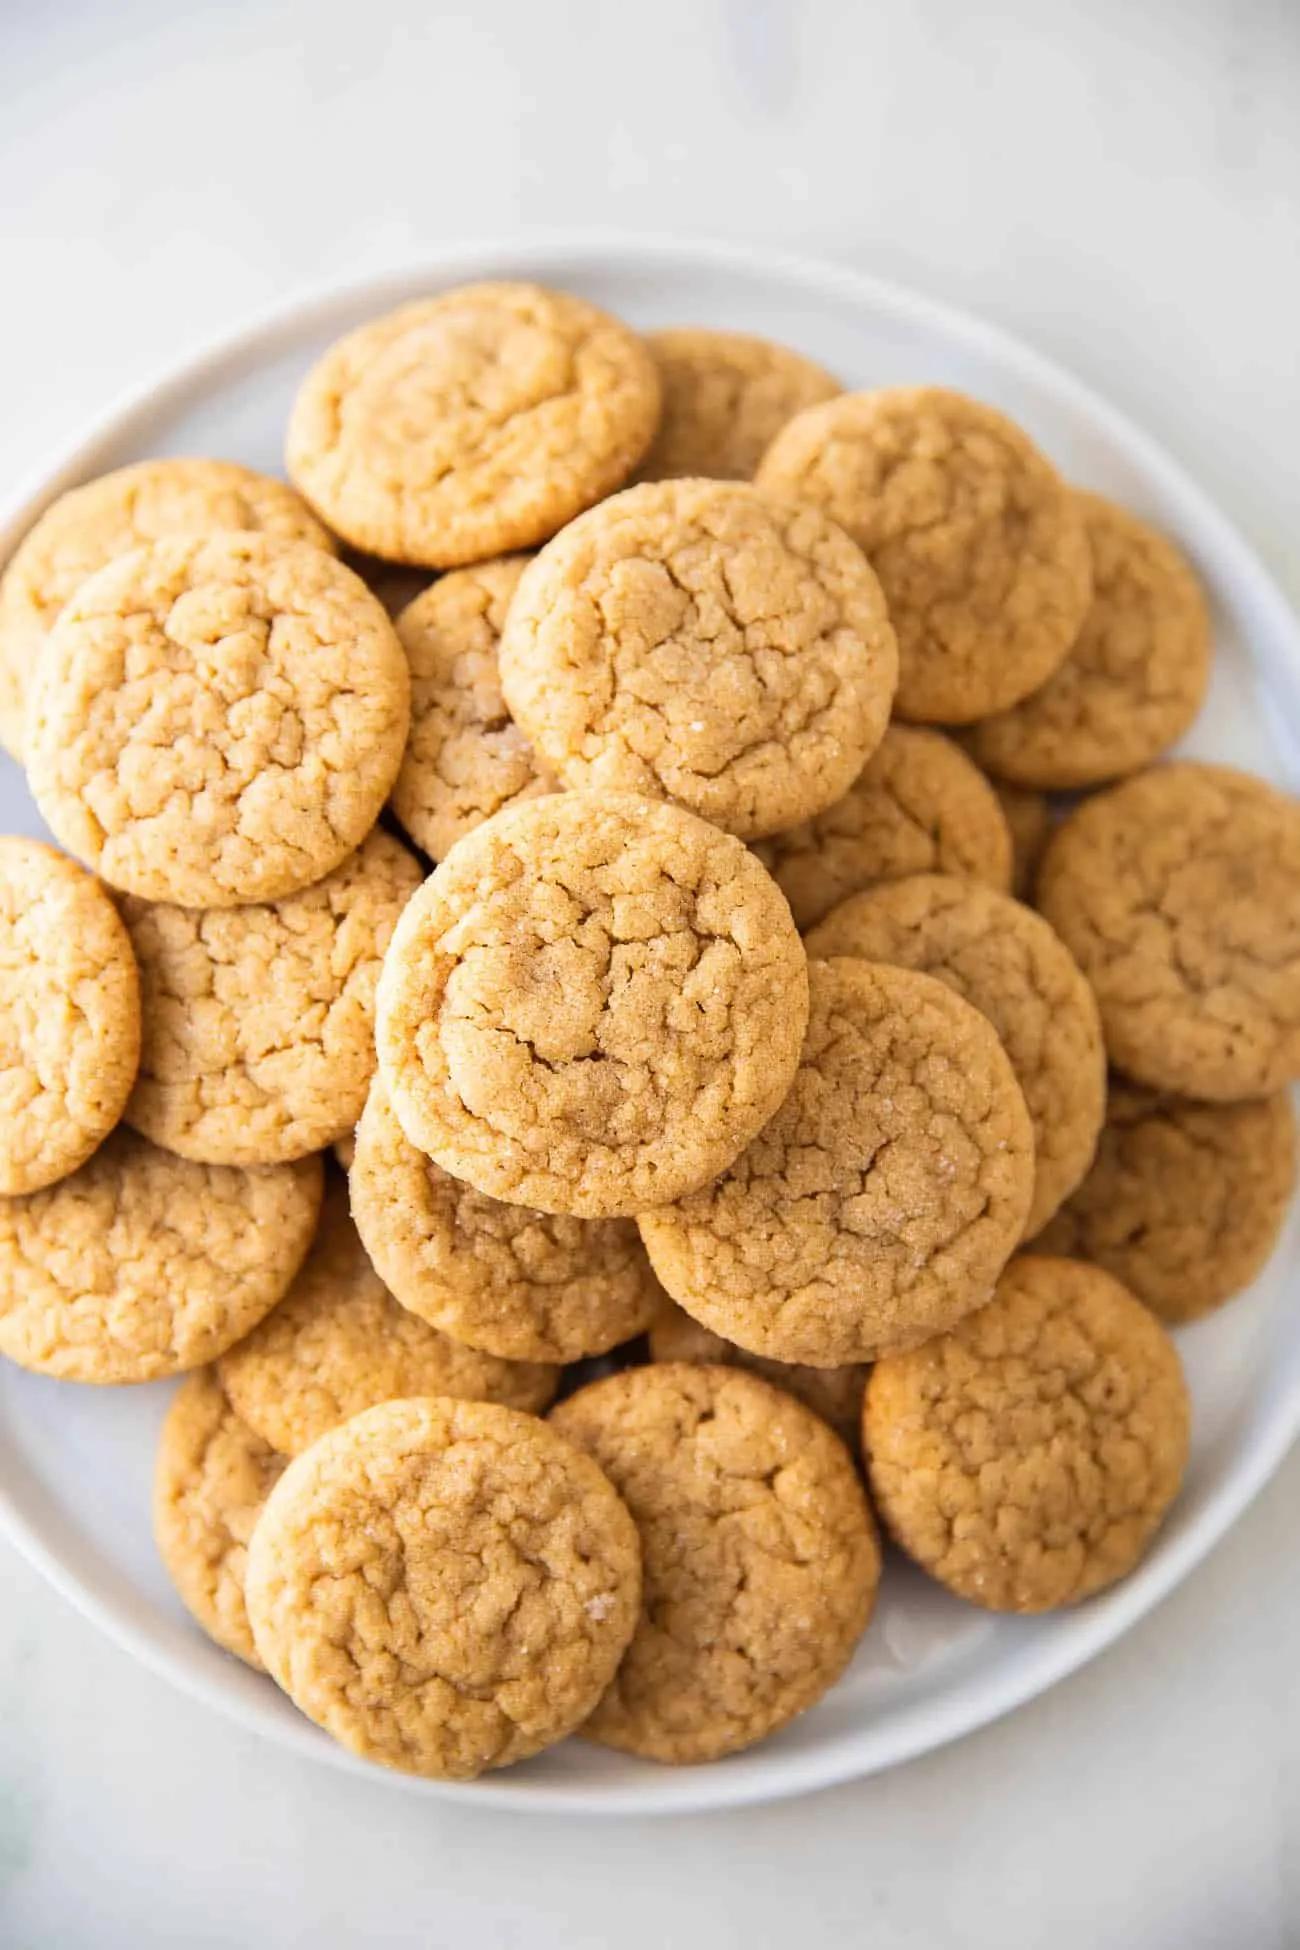 Best Peanut Butter Cookies - Soft, Chewy, Old-Fashioned!